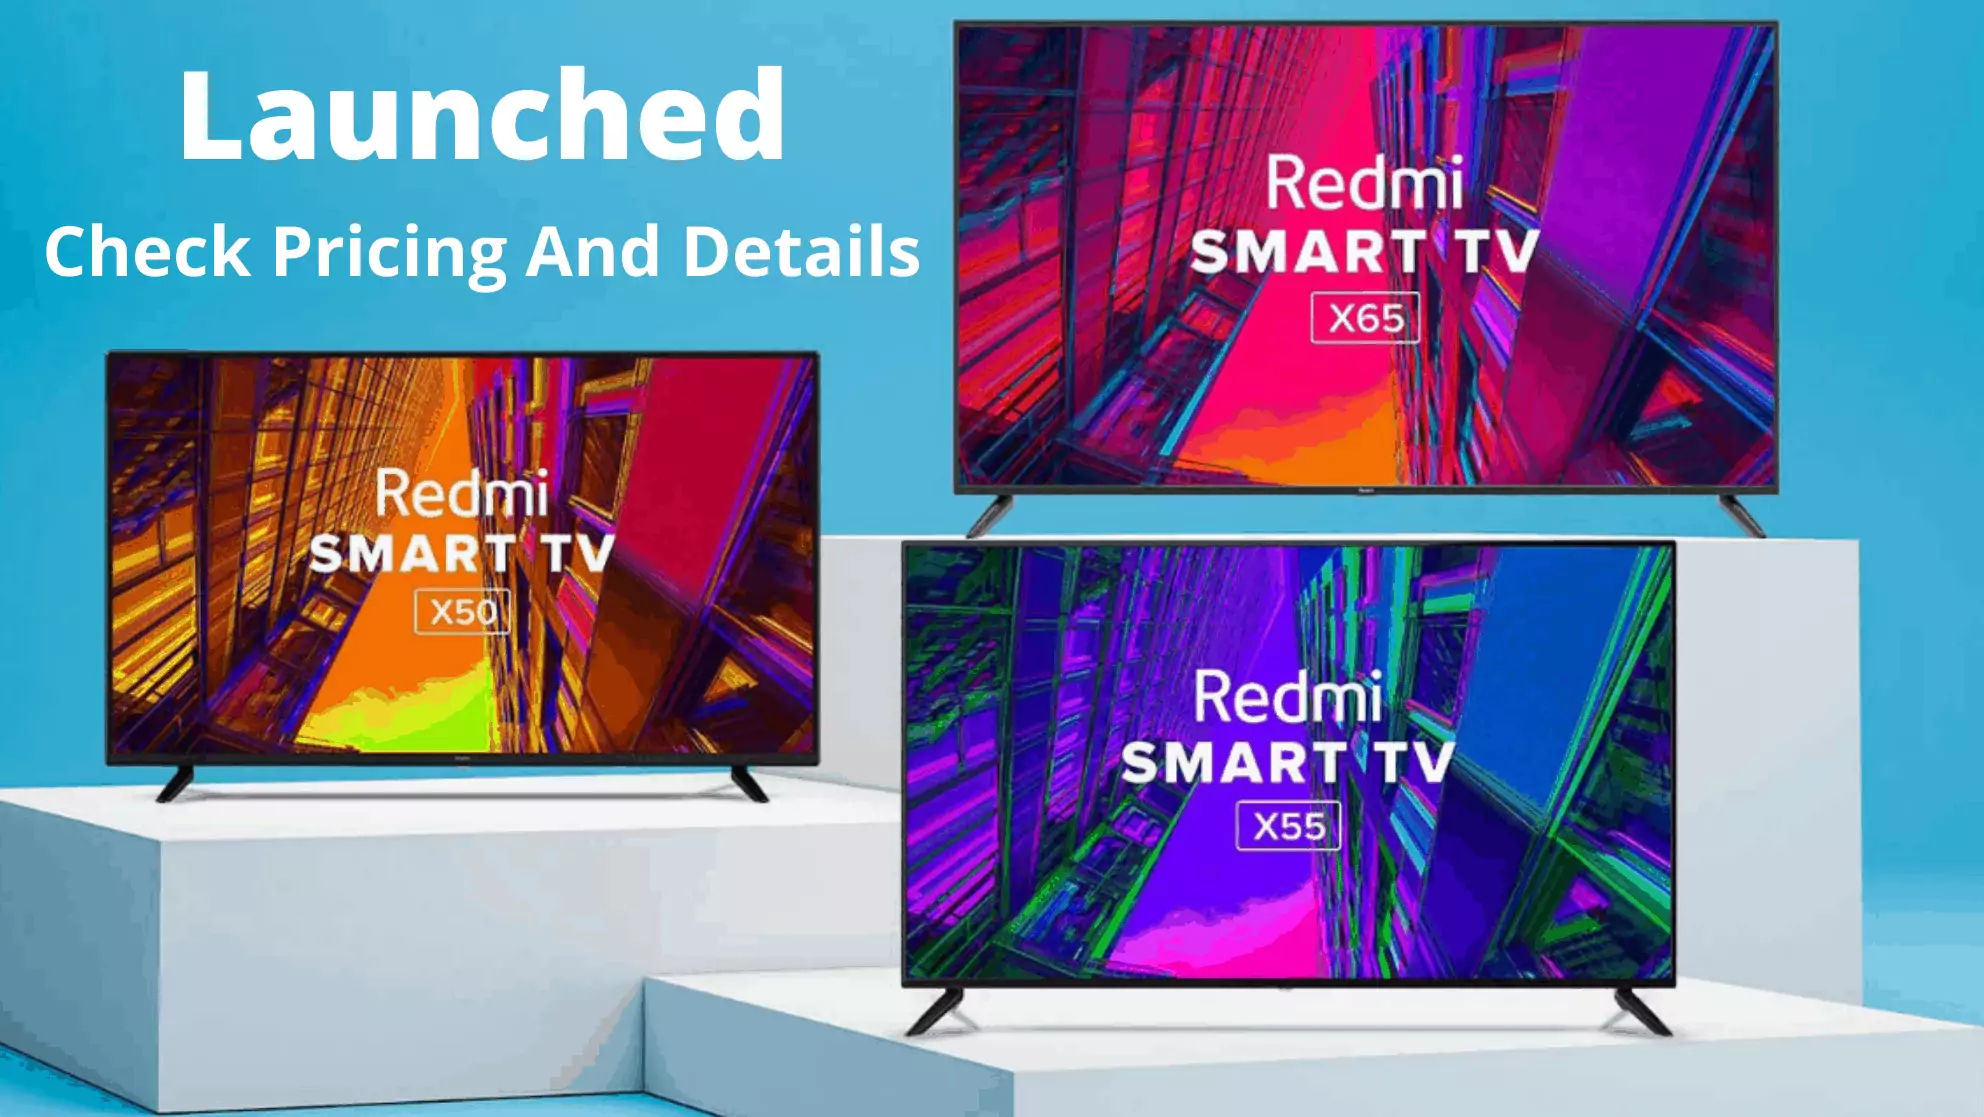 Xiaomi just launched new redmi smart tv x series in India